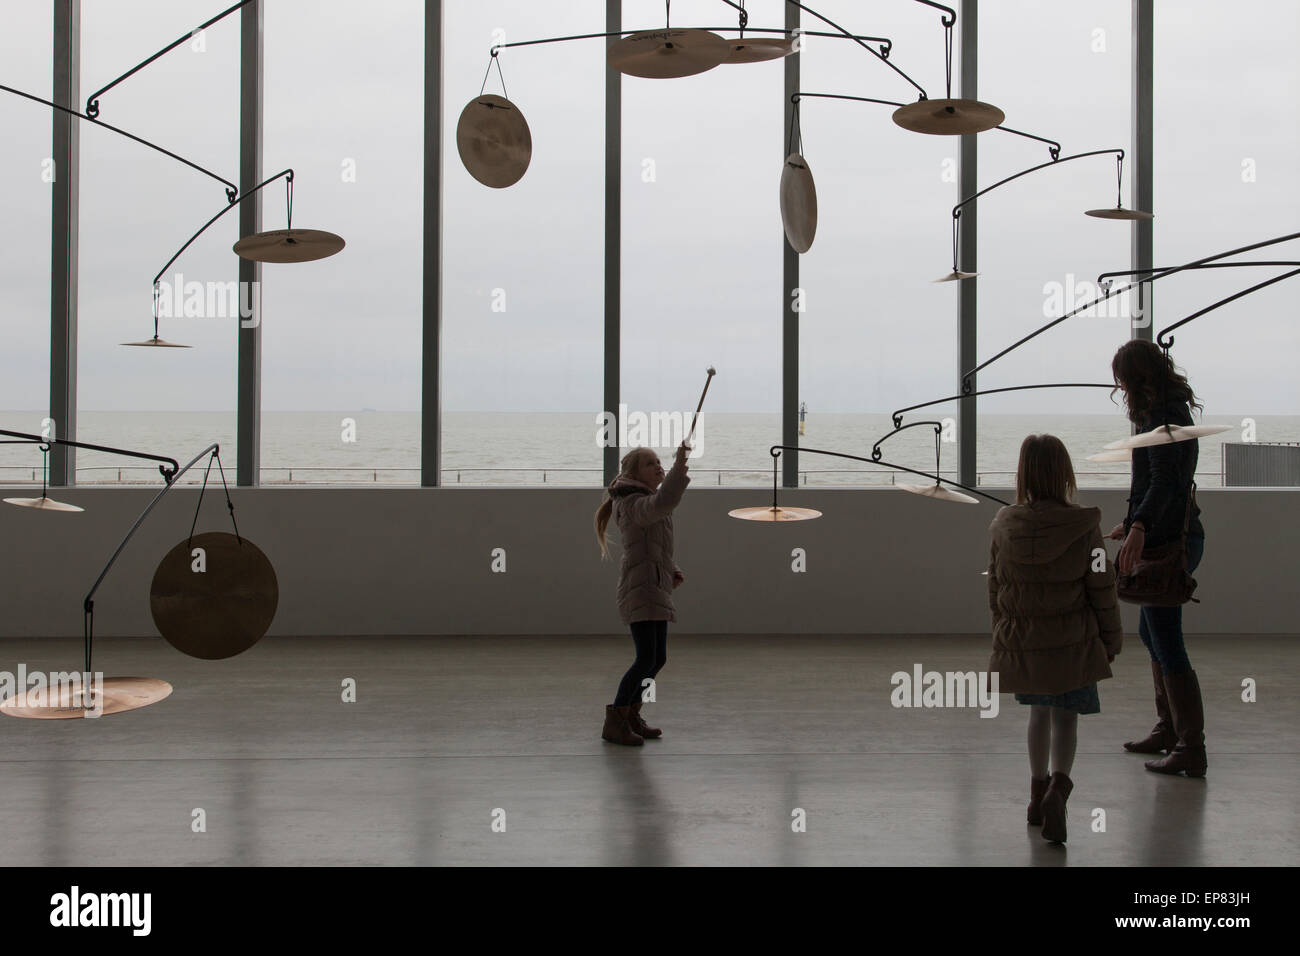 Carlos Amorales art installation at the Turner Contemporary Art Gallery, Margate, Kent, UK Stock Photo